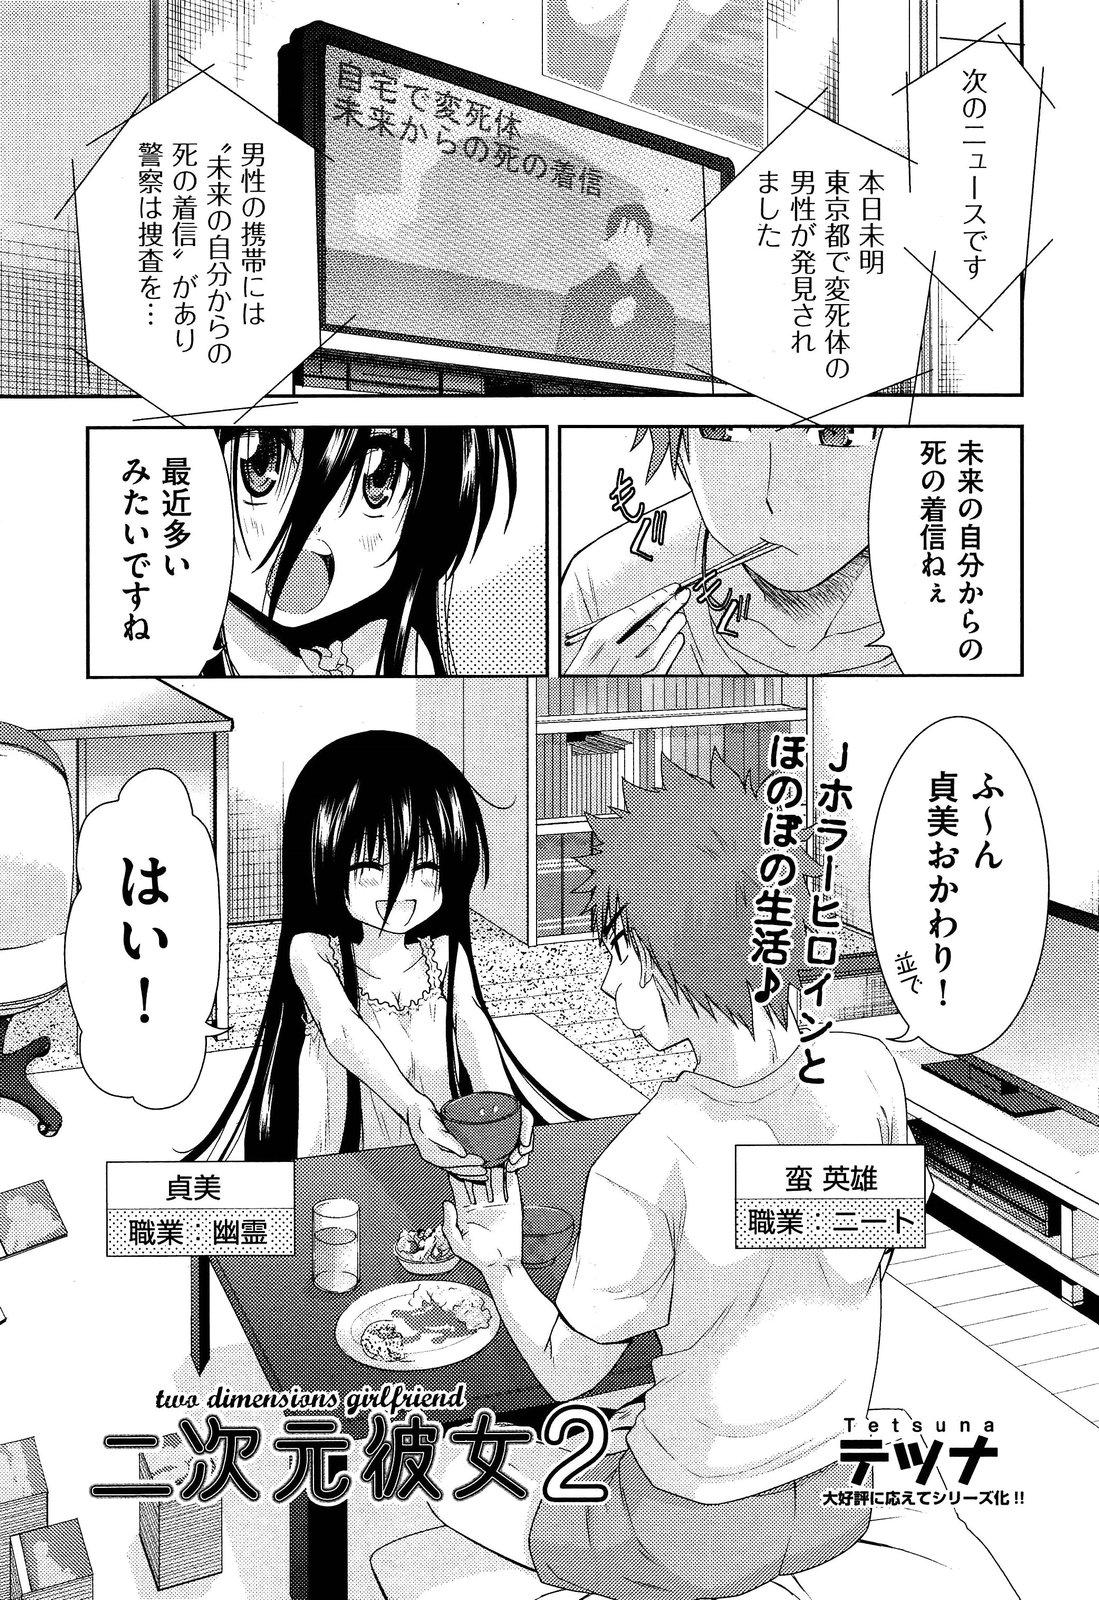 Two dimensions girlfriend Ch.1-4 25